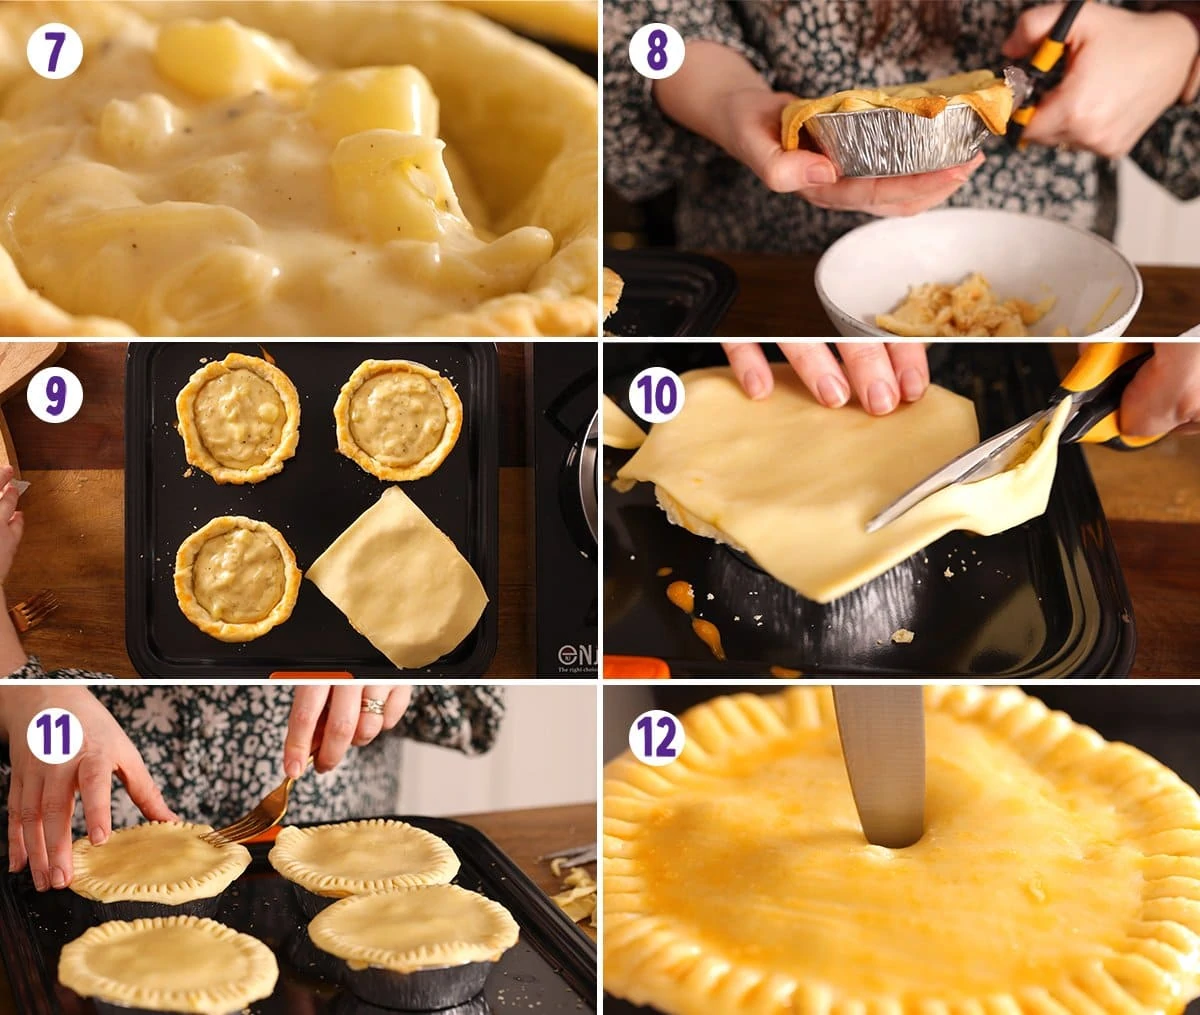 6 image collage showing final process steps for making individual cheese and onion pies.